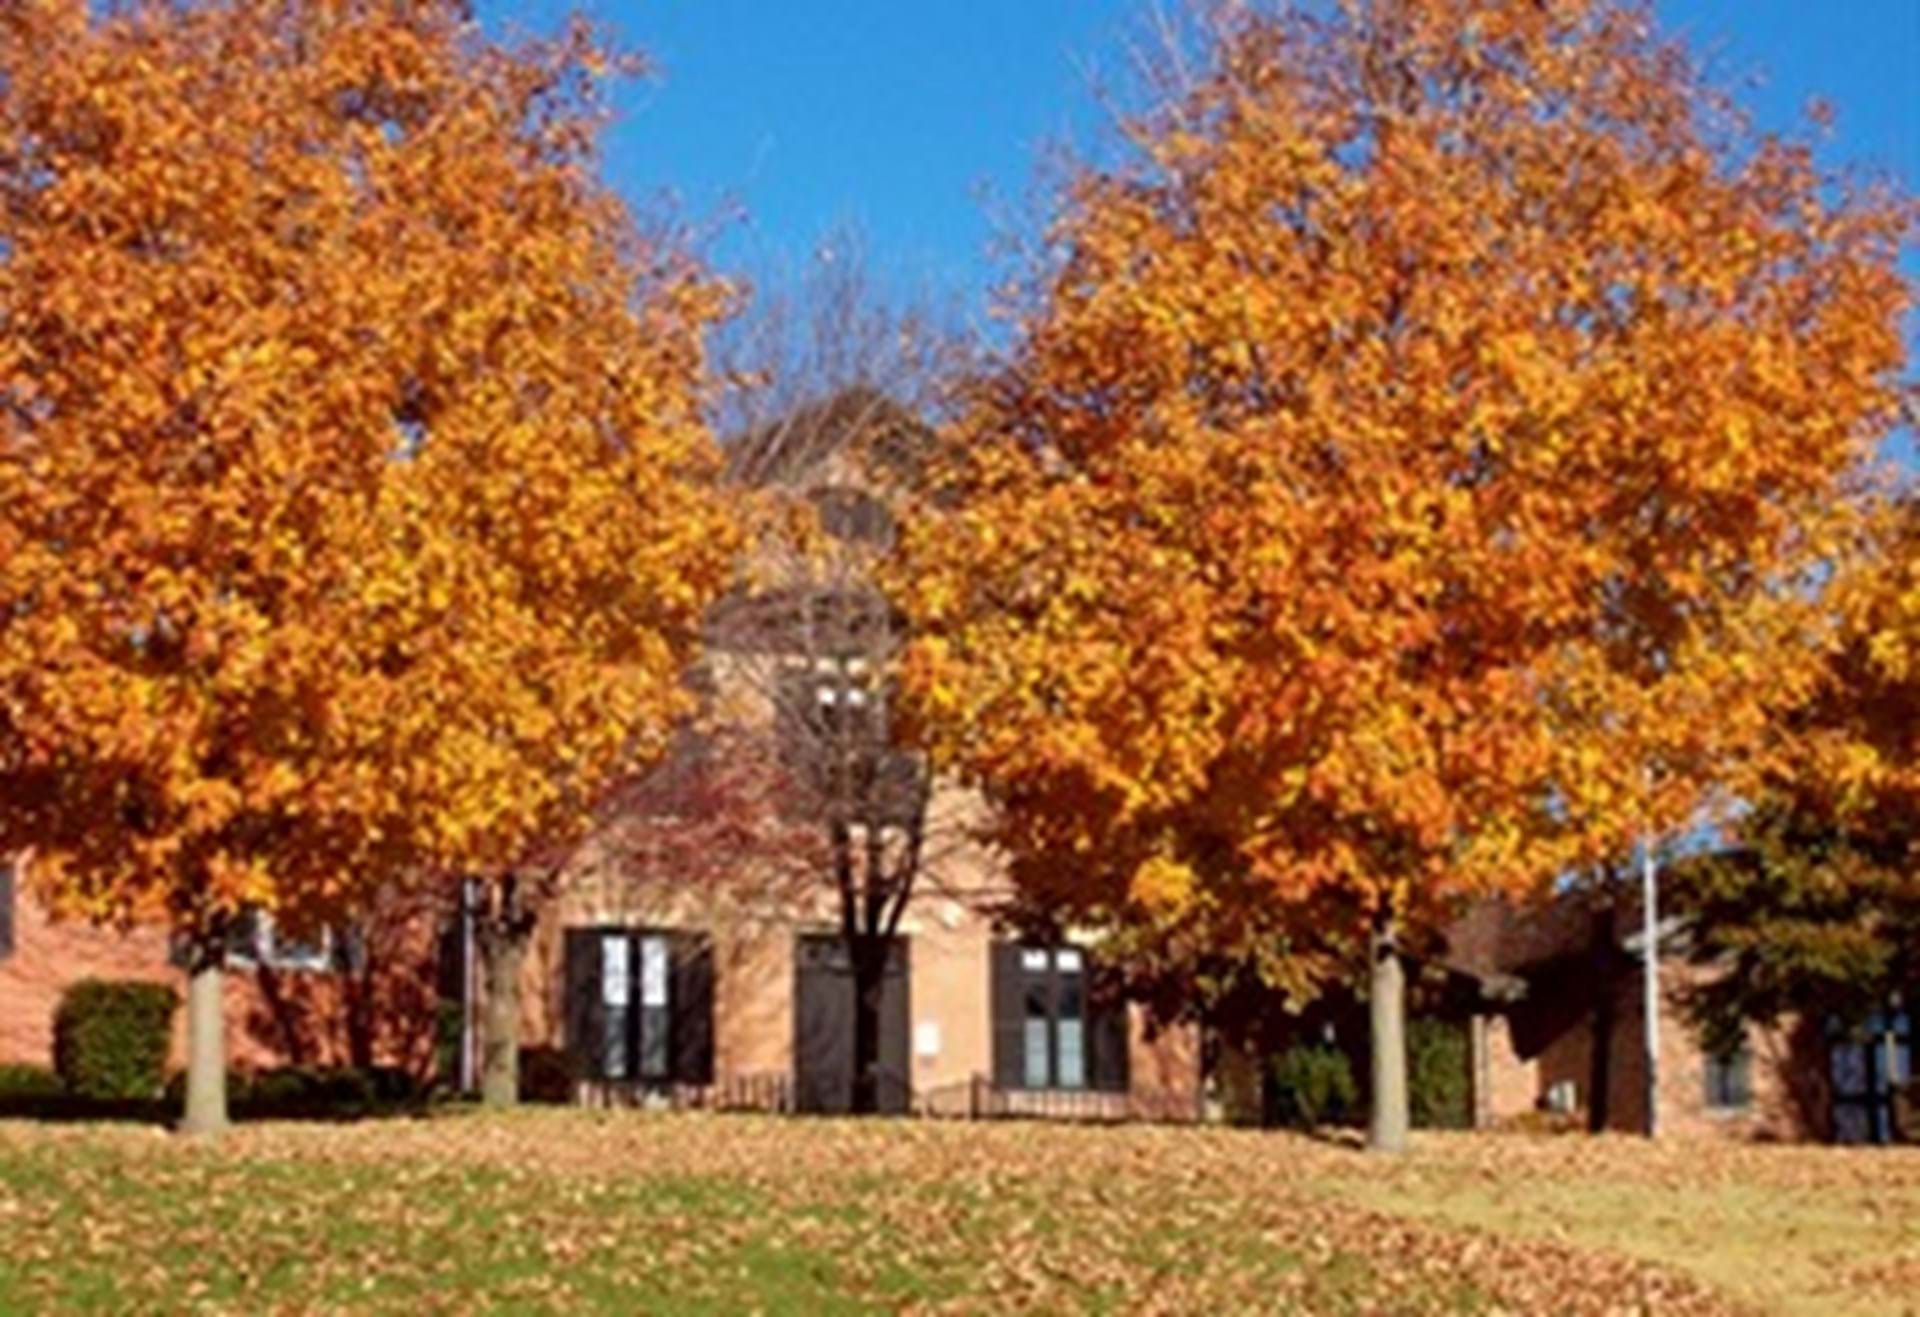 Courthouse in the Fall